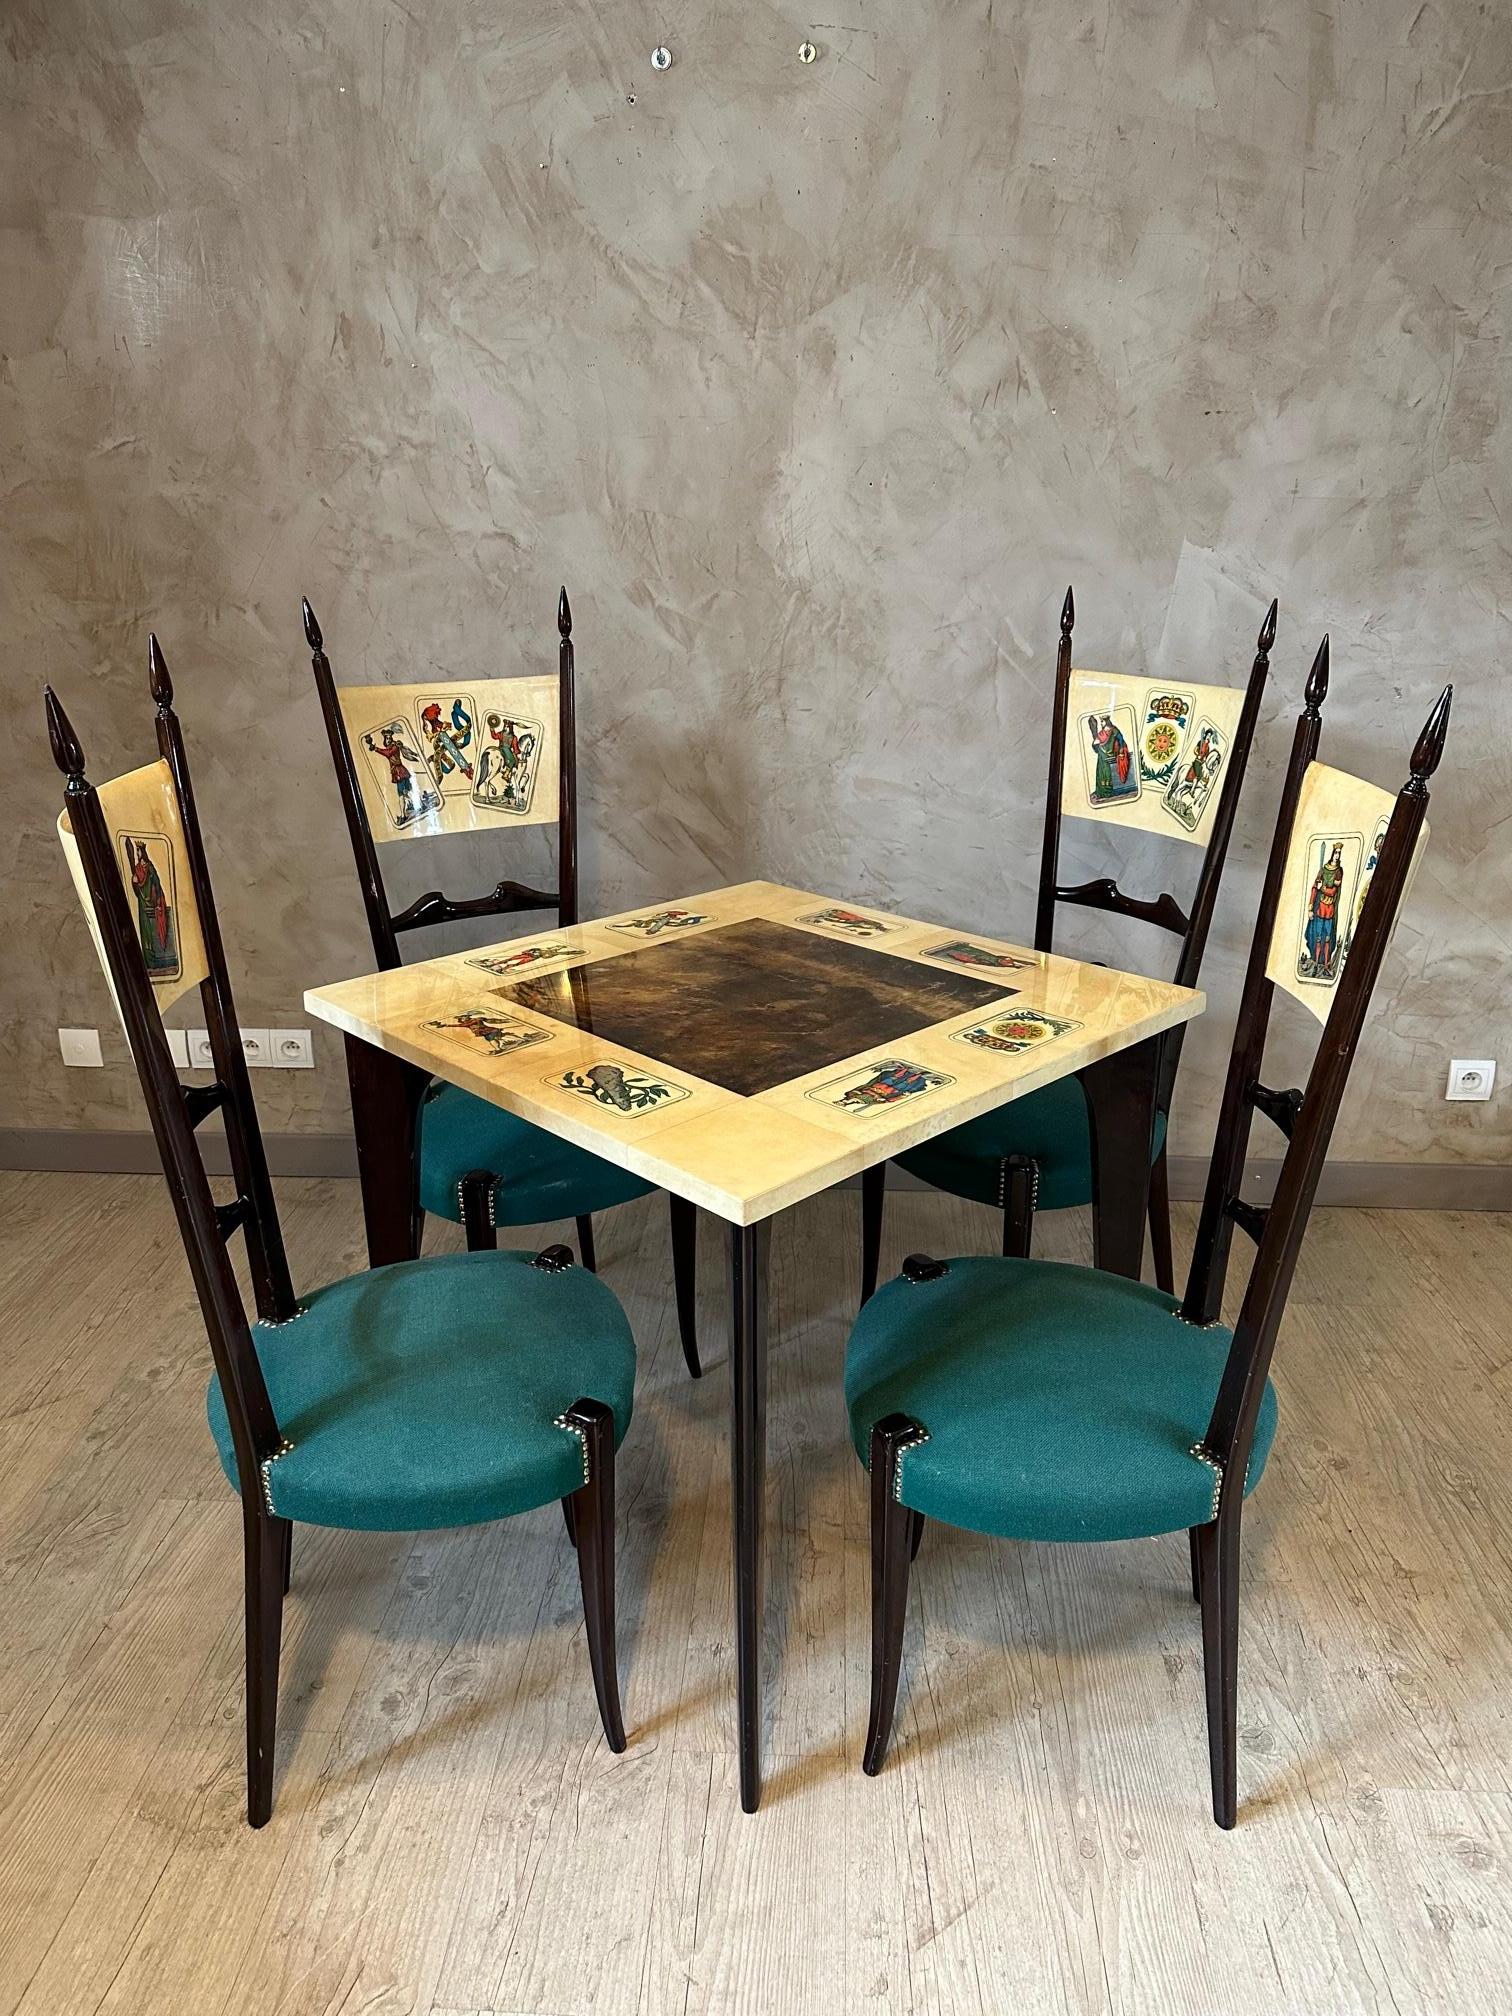 Italian 20th century Aldo Tura Lacquered Goatskin and Walnut Table With Chairs, 1960s For Sale